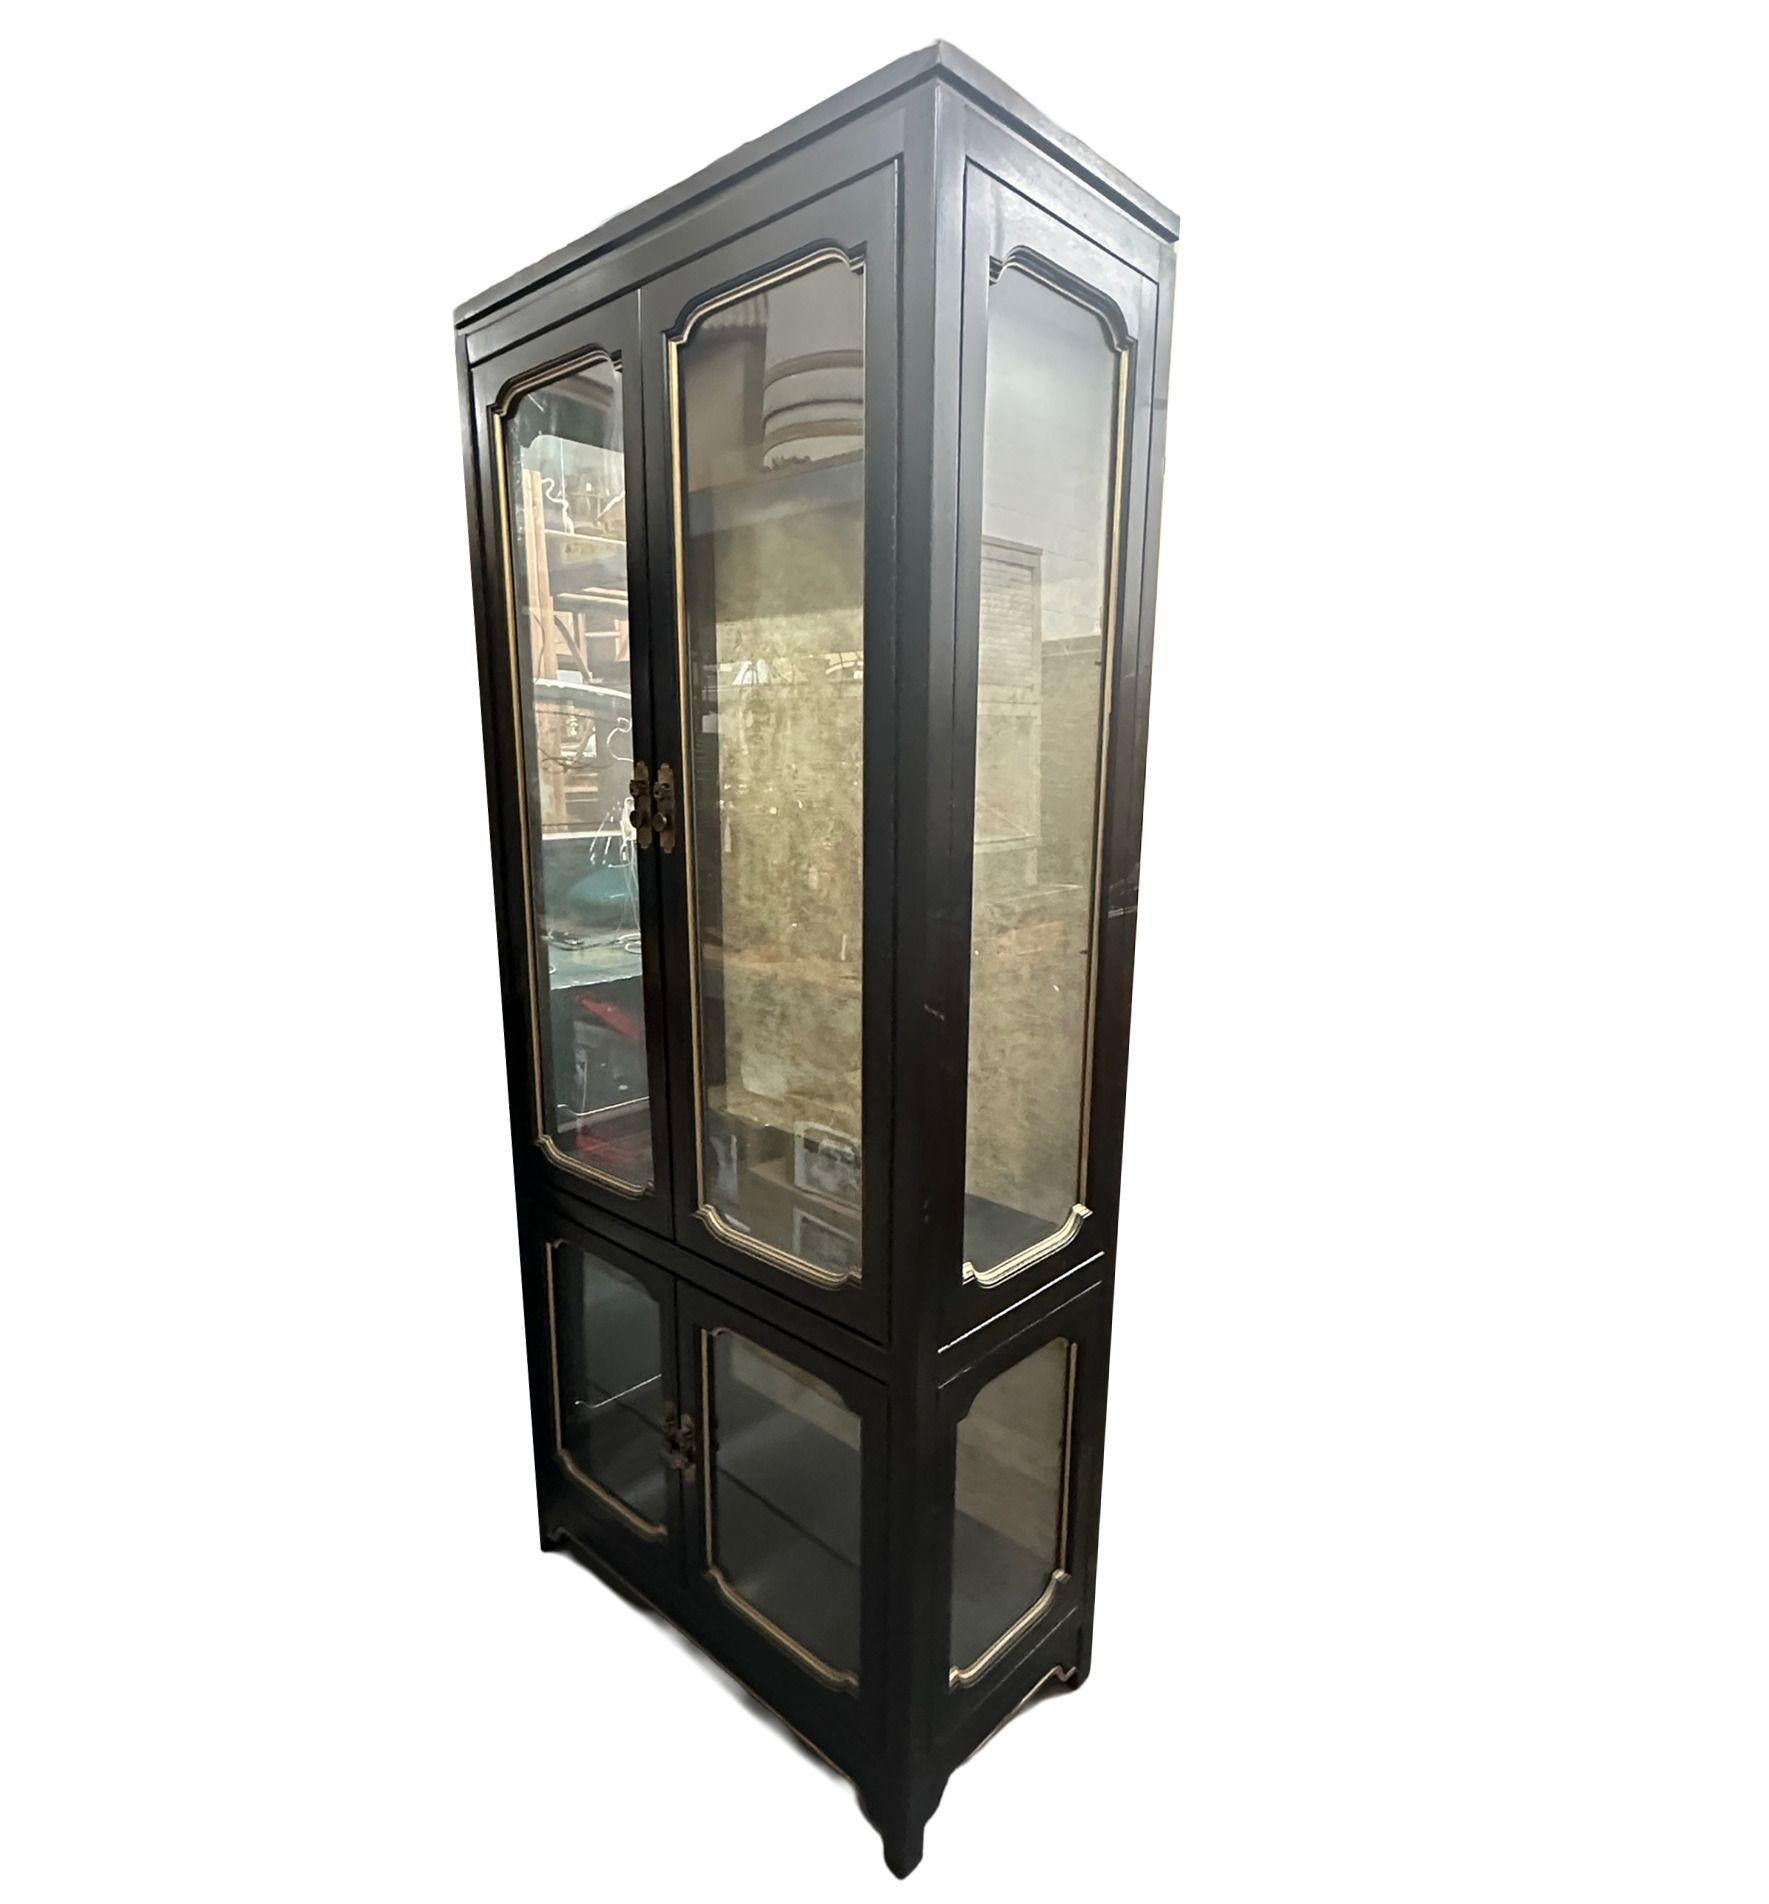 Presented here is an exquisite vintage chinoiserie-inspired illuminated display cabinet. Adorned with its original black finish complemented by elegant gold accents, this piece exudes timeless charm.

Illumination graces both the upper and lower